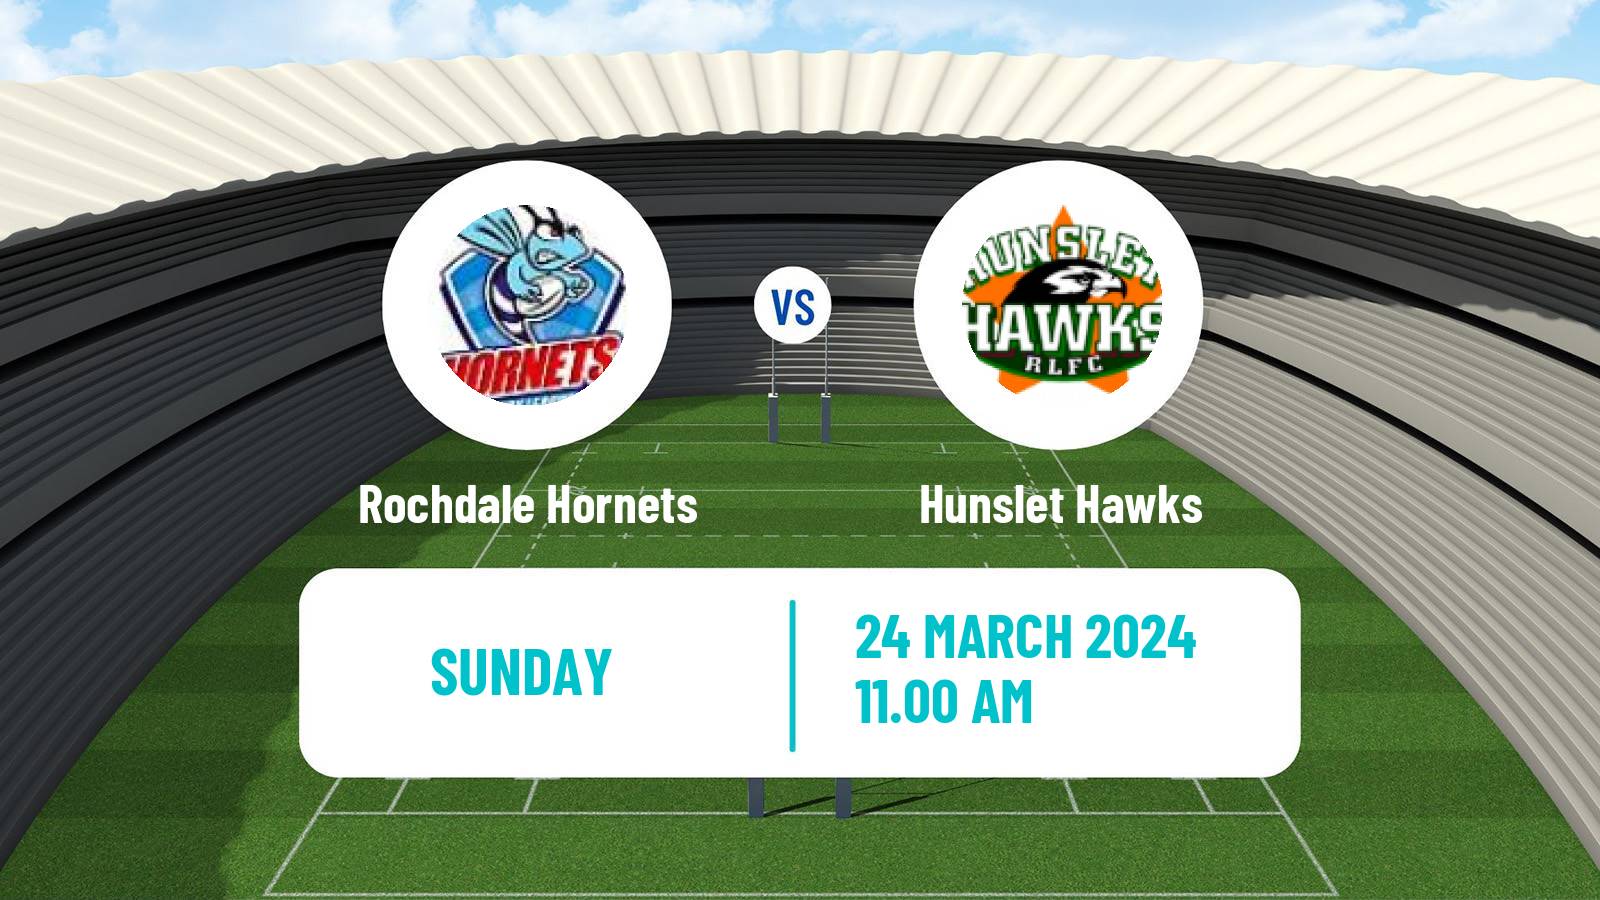 Rugby league English League 1 Rugby League Rochdale Hornets - Hunslet Hawks